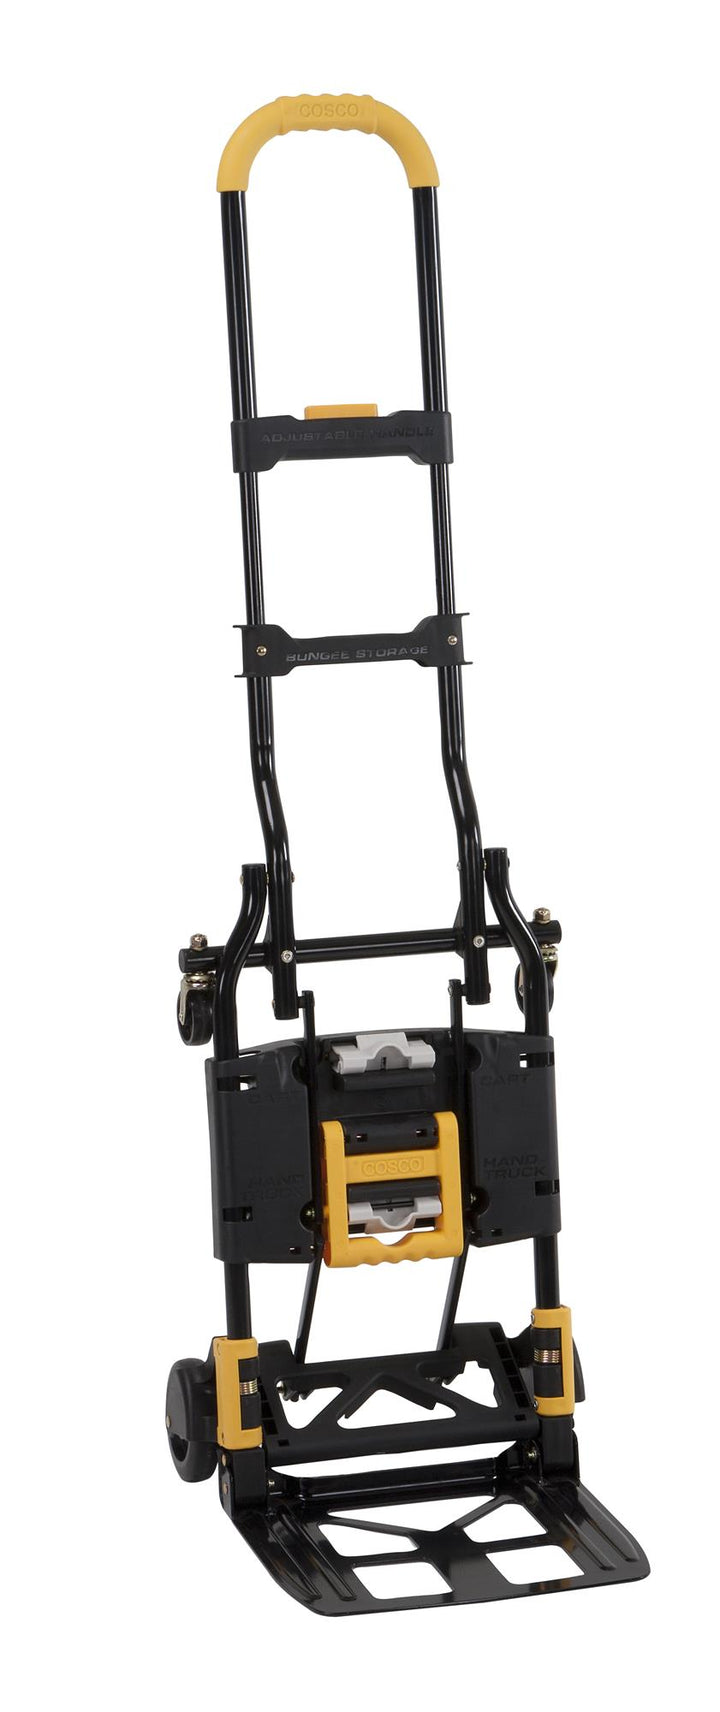 Folding 2 in 1 Hand Truck Multi-Position with Extendable Handle -  Black/Black/Yellow